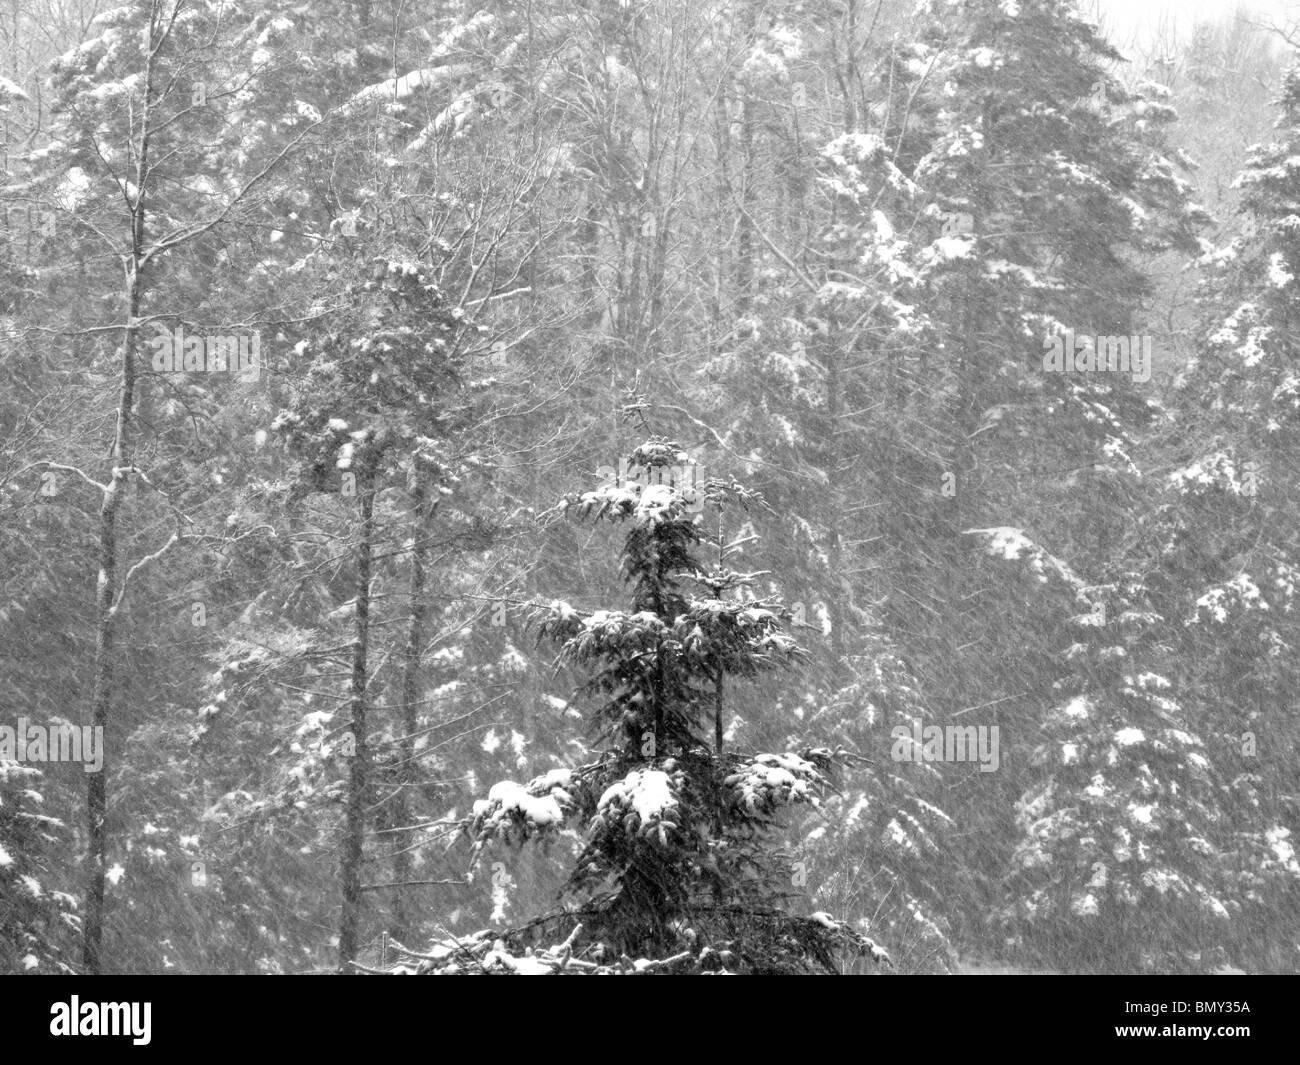 A forest of green pine trees covered with blowing winter snow Stock Photo